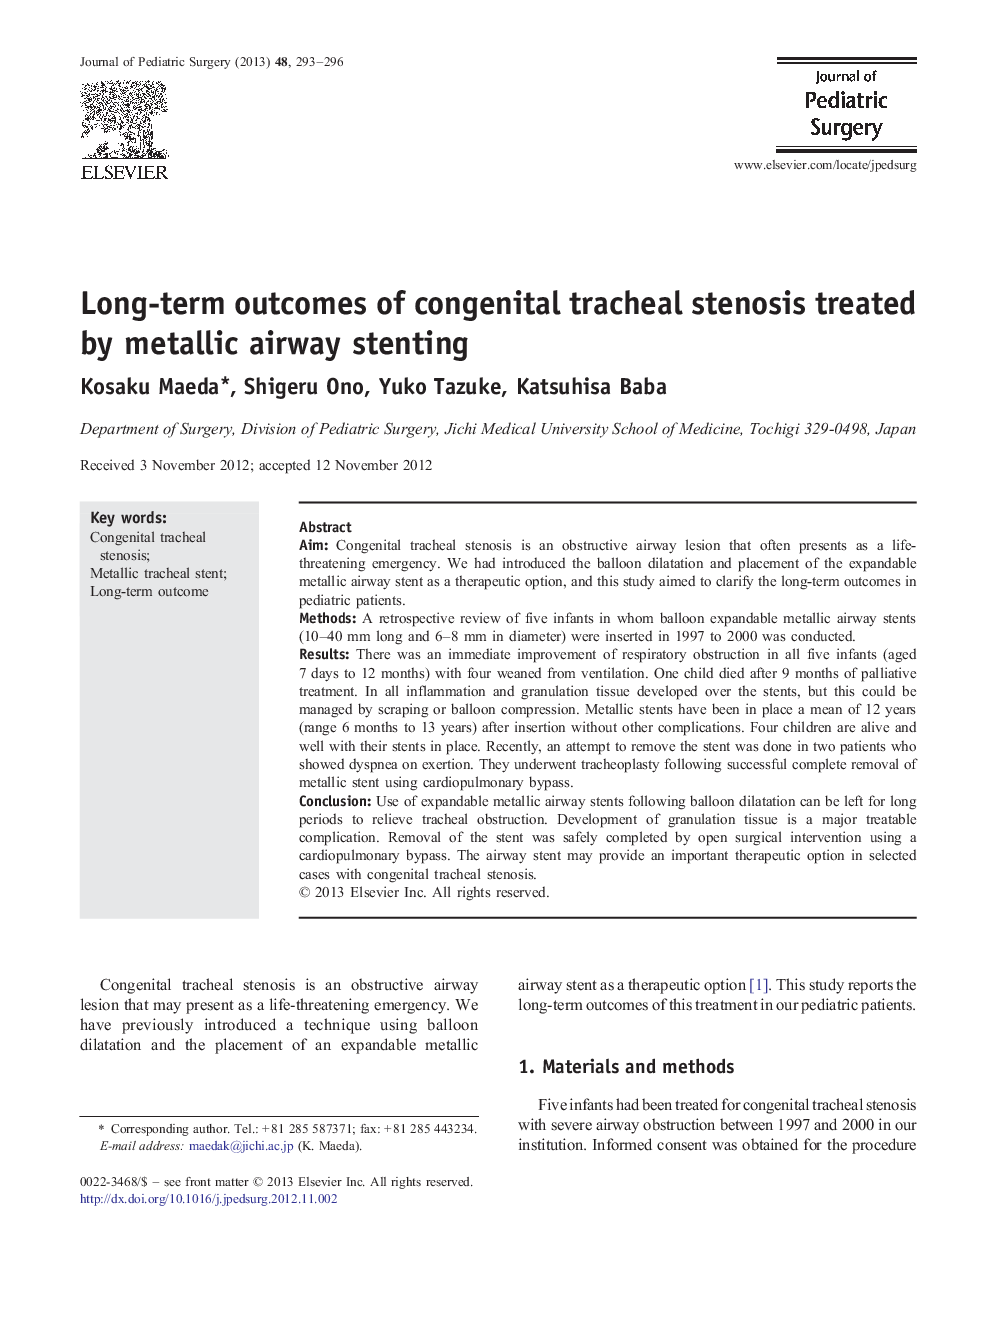 Long-term outcomes of congenital tracheal stenosis treated by metallic airway stenting